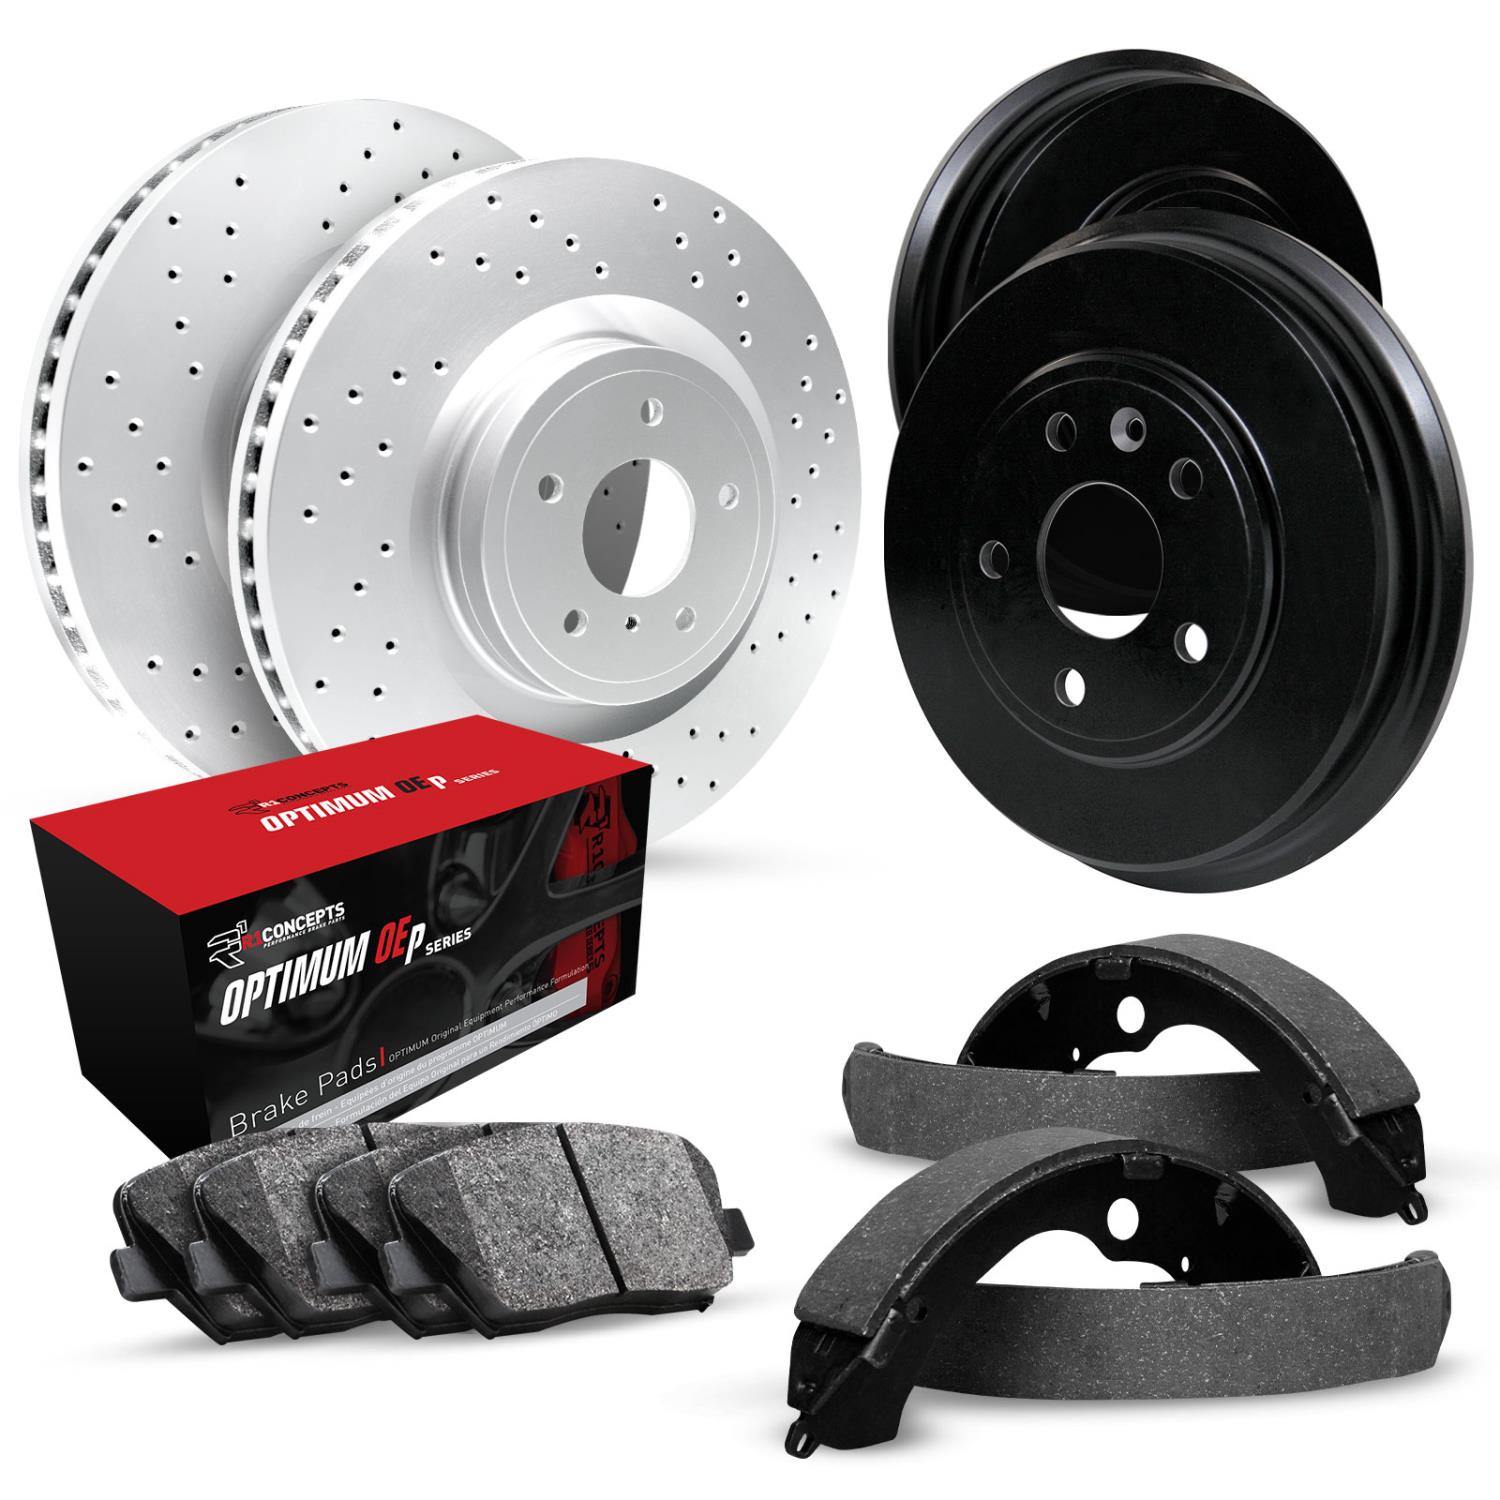 GEO-Carbon Drilled Brake Rotor & Drum Set w/Optimum OE Pads & Shoes, 2013-2015 Infiniti/Nissan, Position: Front & Rear